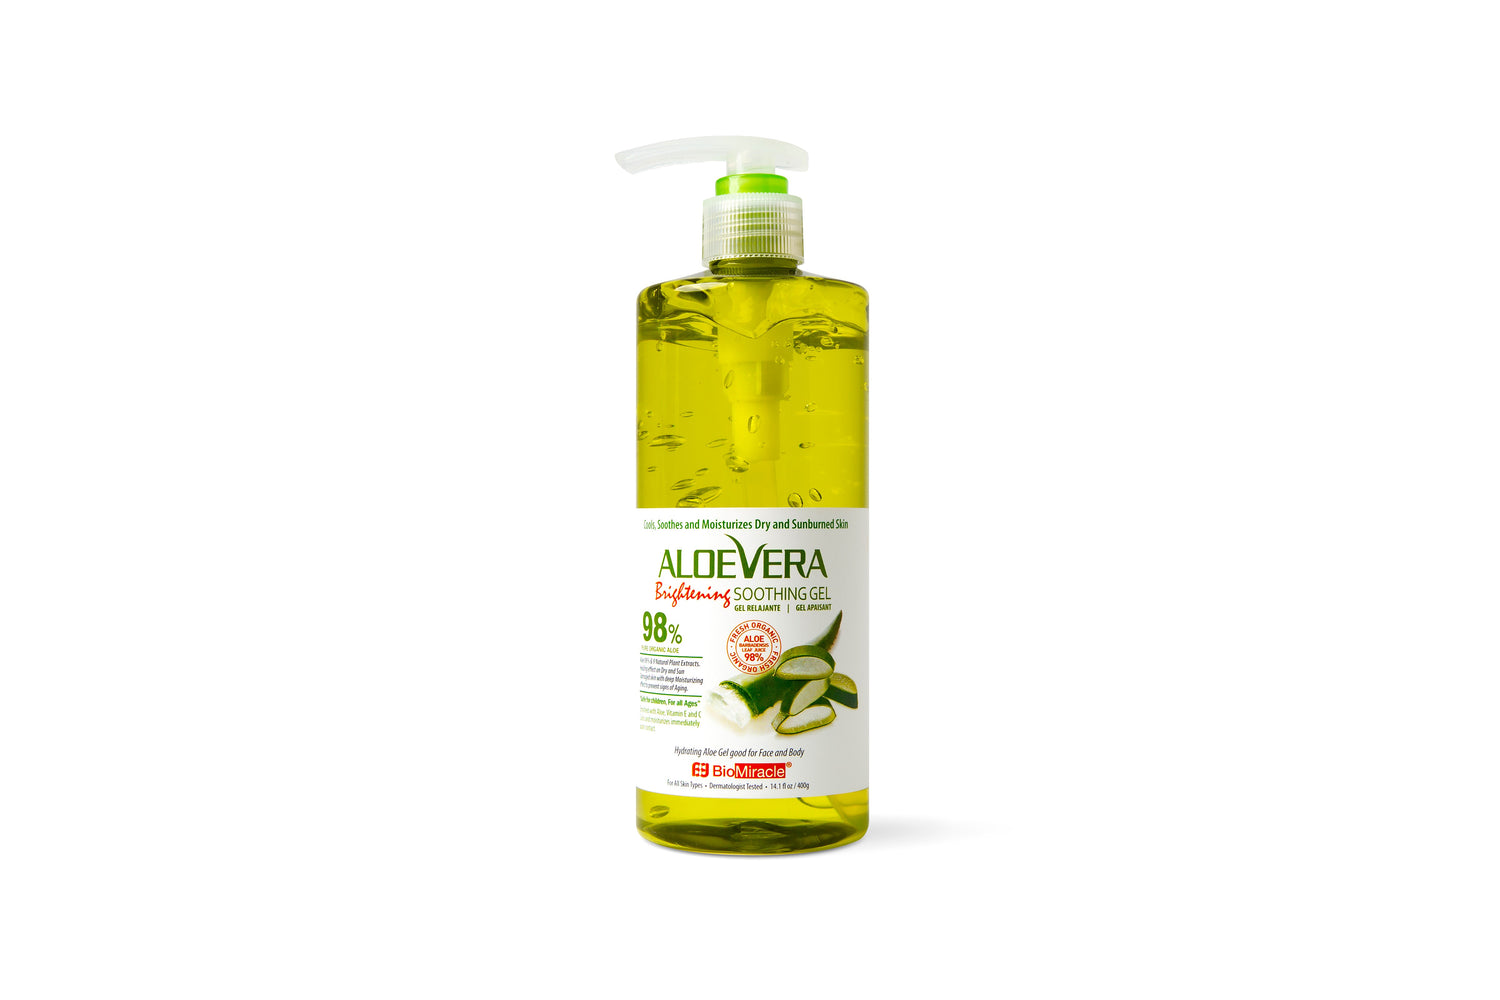 Aloe Vera Soothing Mist, 1 Spray Bottle, with 9 Natural Plant Extracts, for Deep Hydration and Anti-Aging Benefits